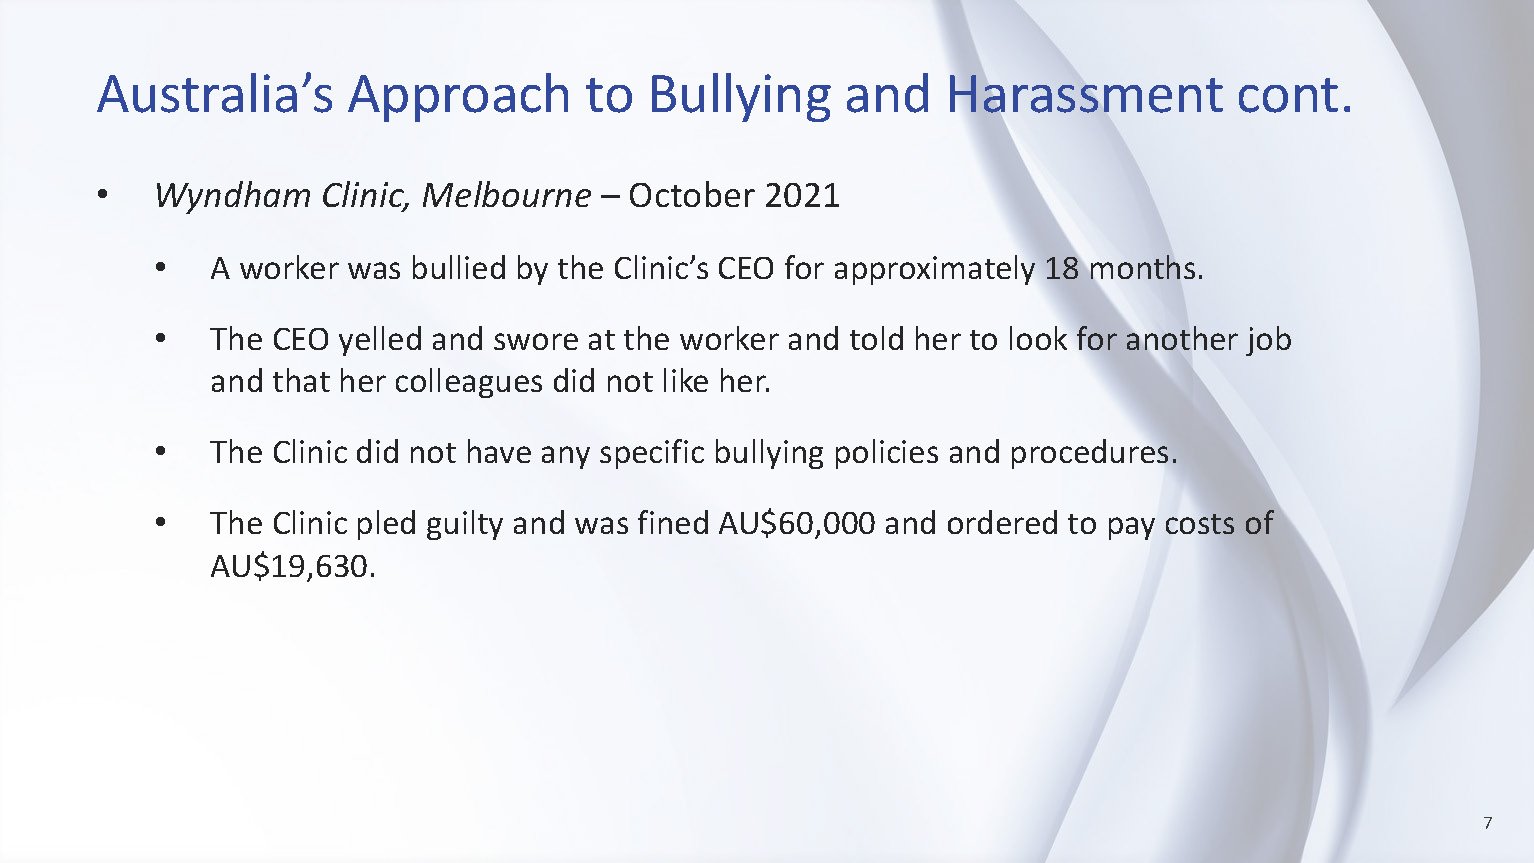 Workplace Bullying and Harassment – WorkSafe NZ’s Approach_Page_8.jpg